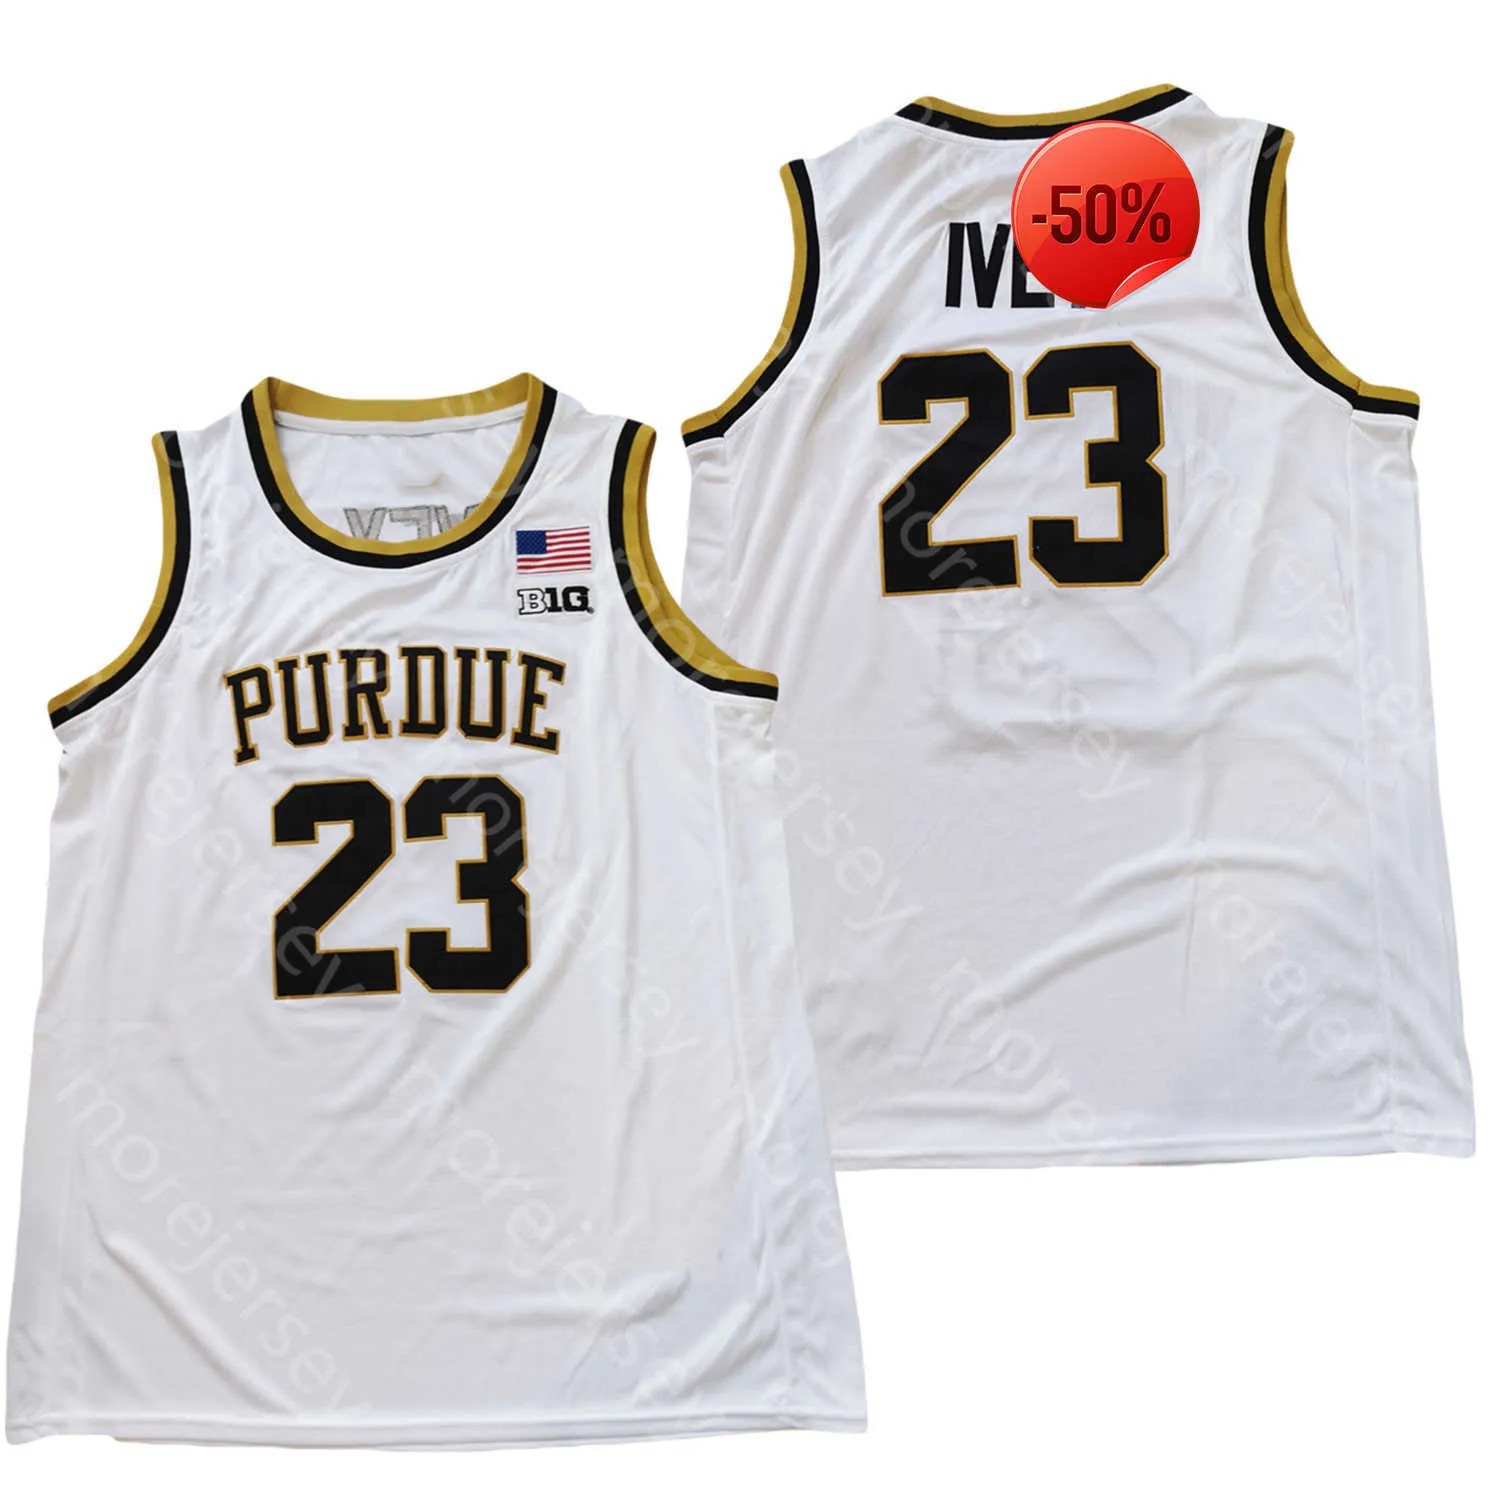 NCAA College Purdue Boilermakers Jersey Jersey Jaden Ivey White Size S-3XL All Ed Ed